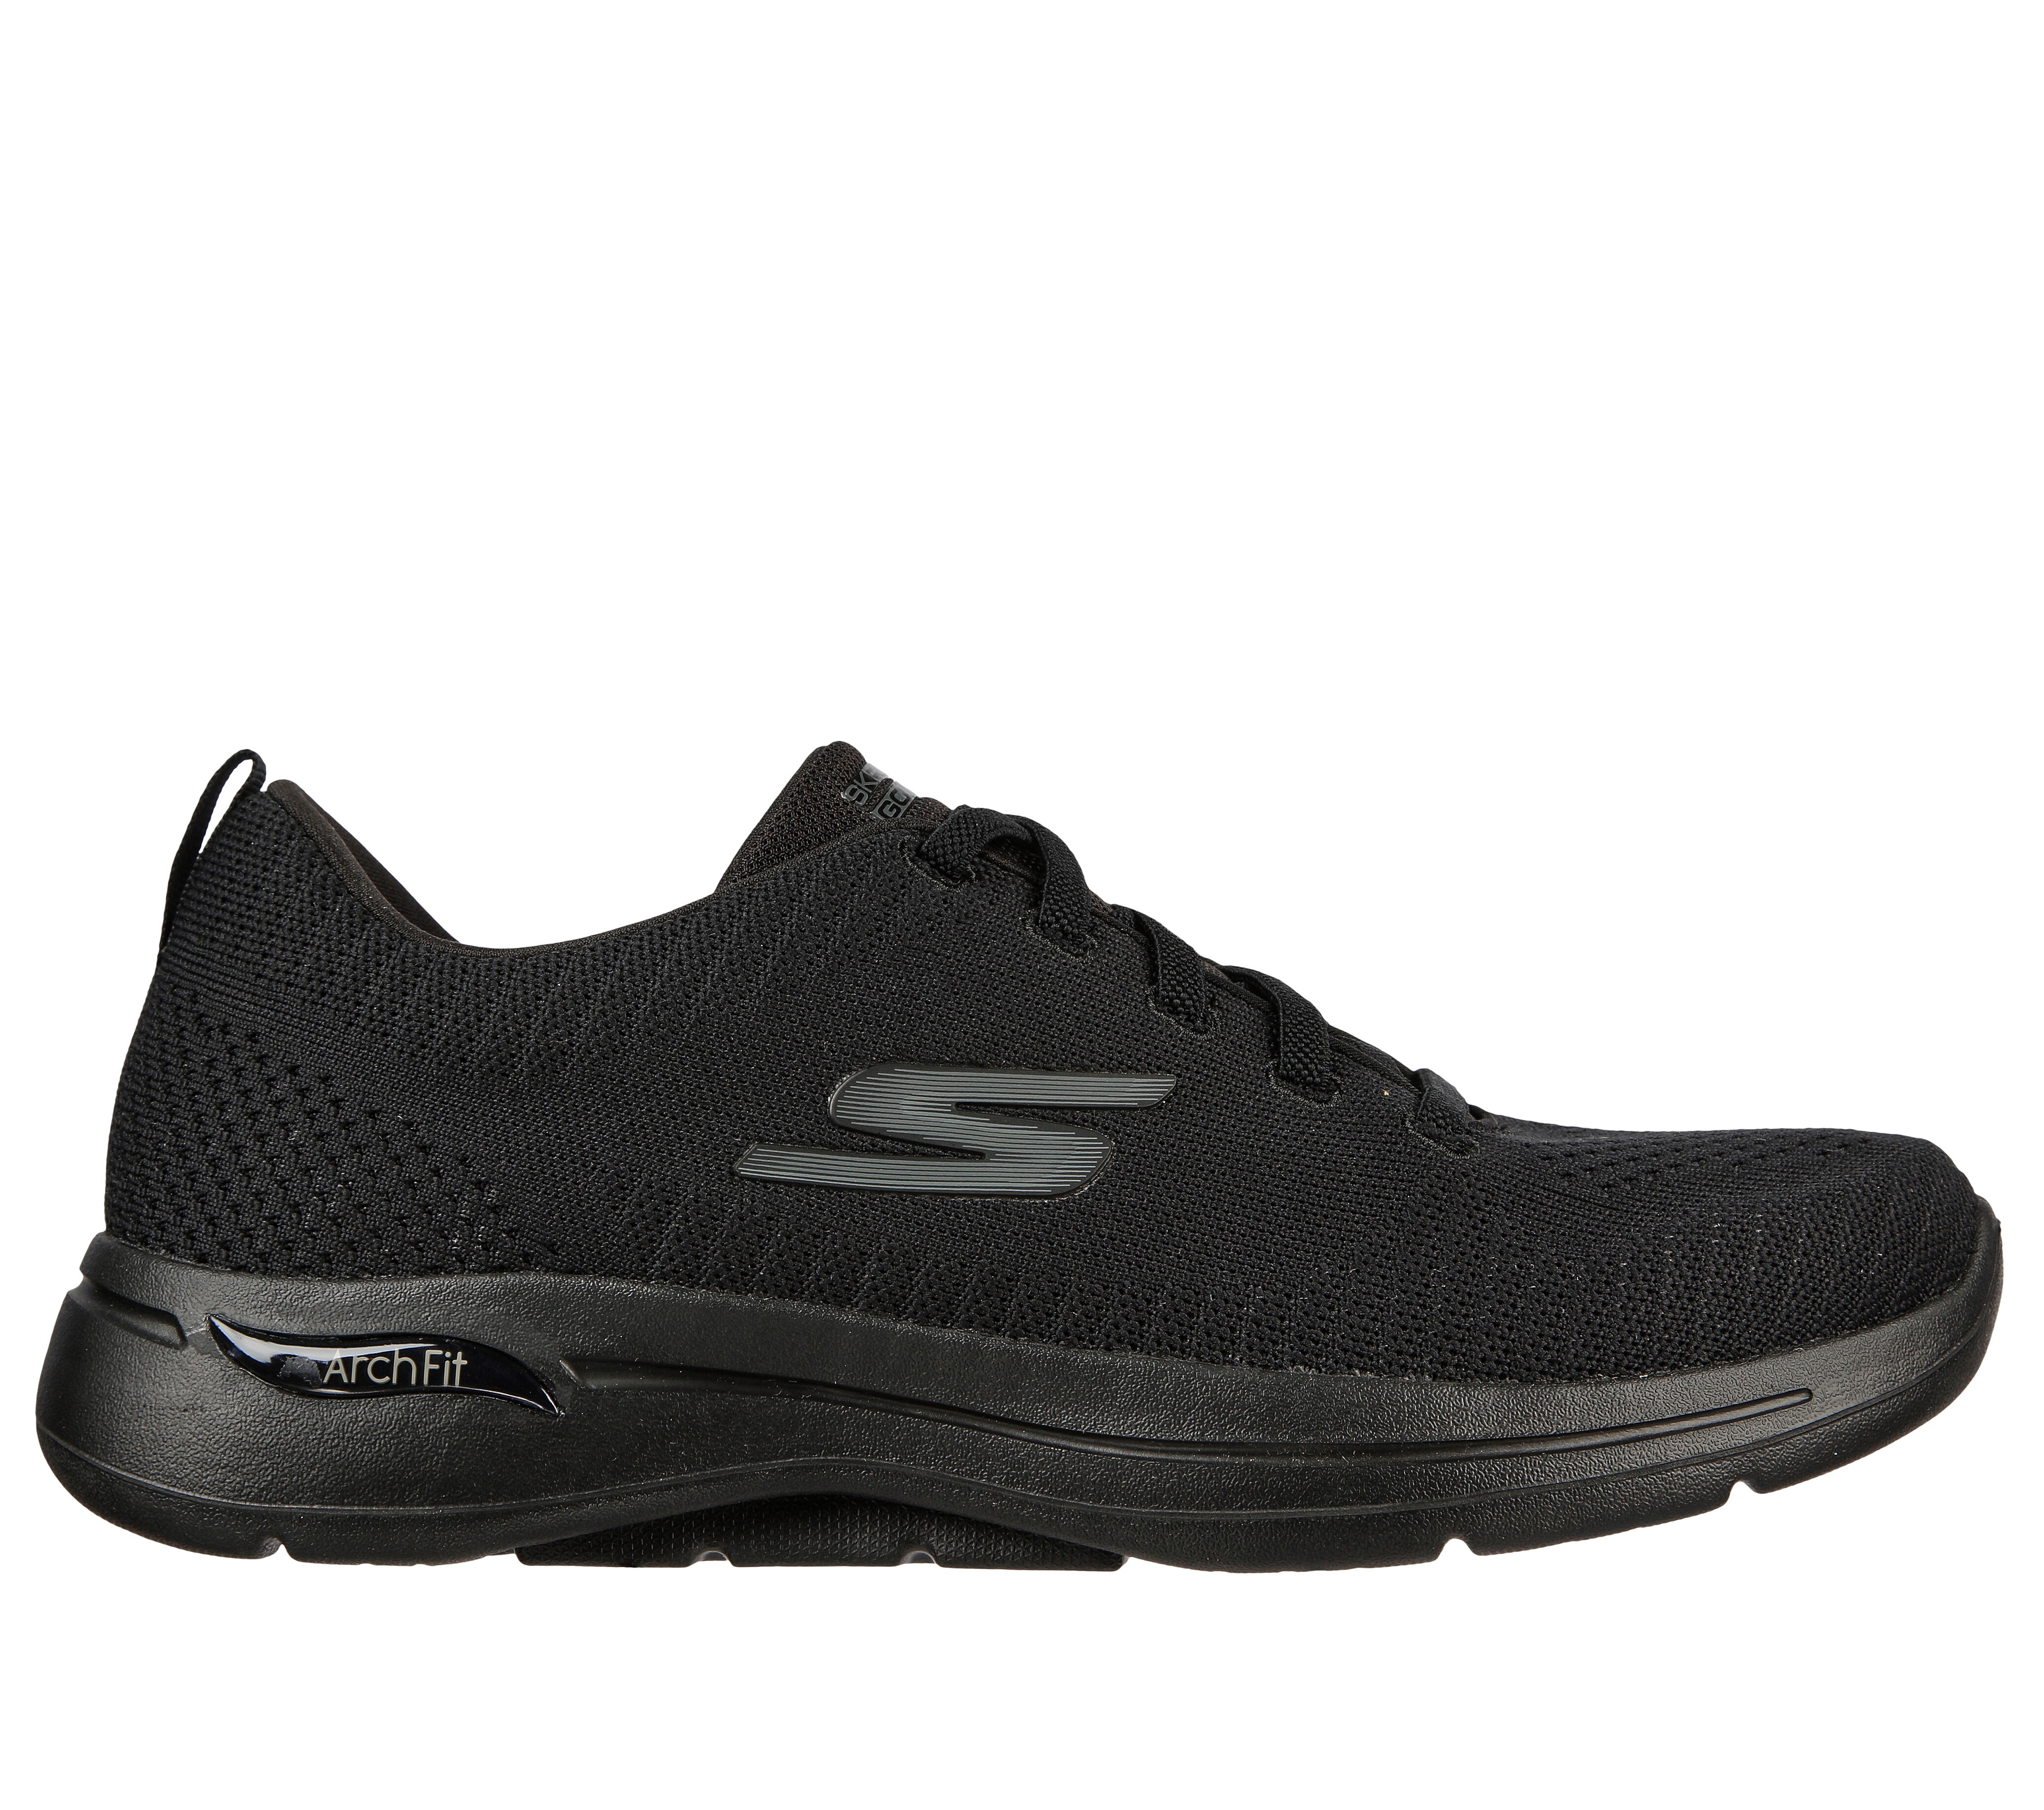 skechers shoes price list